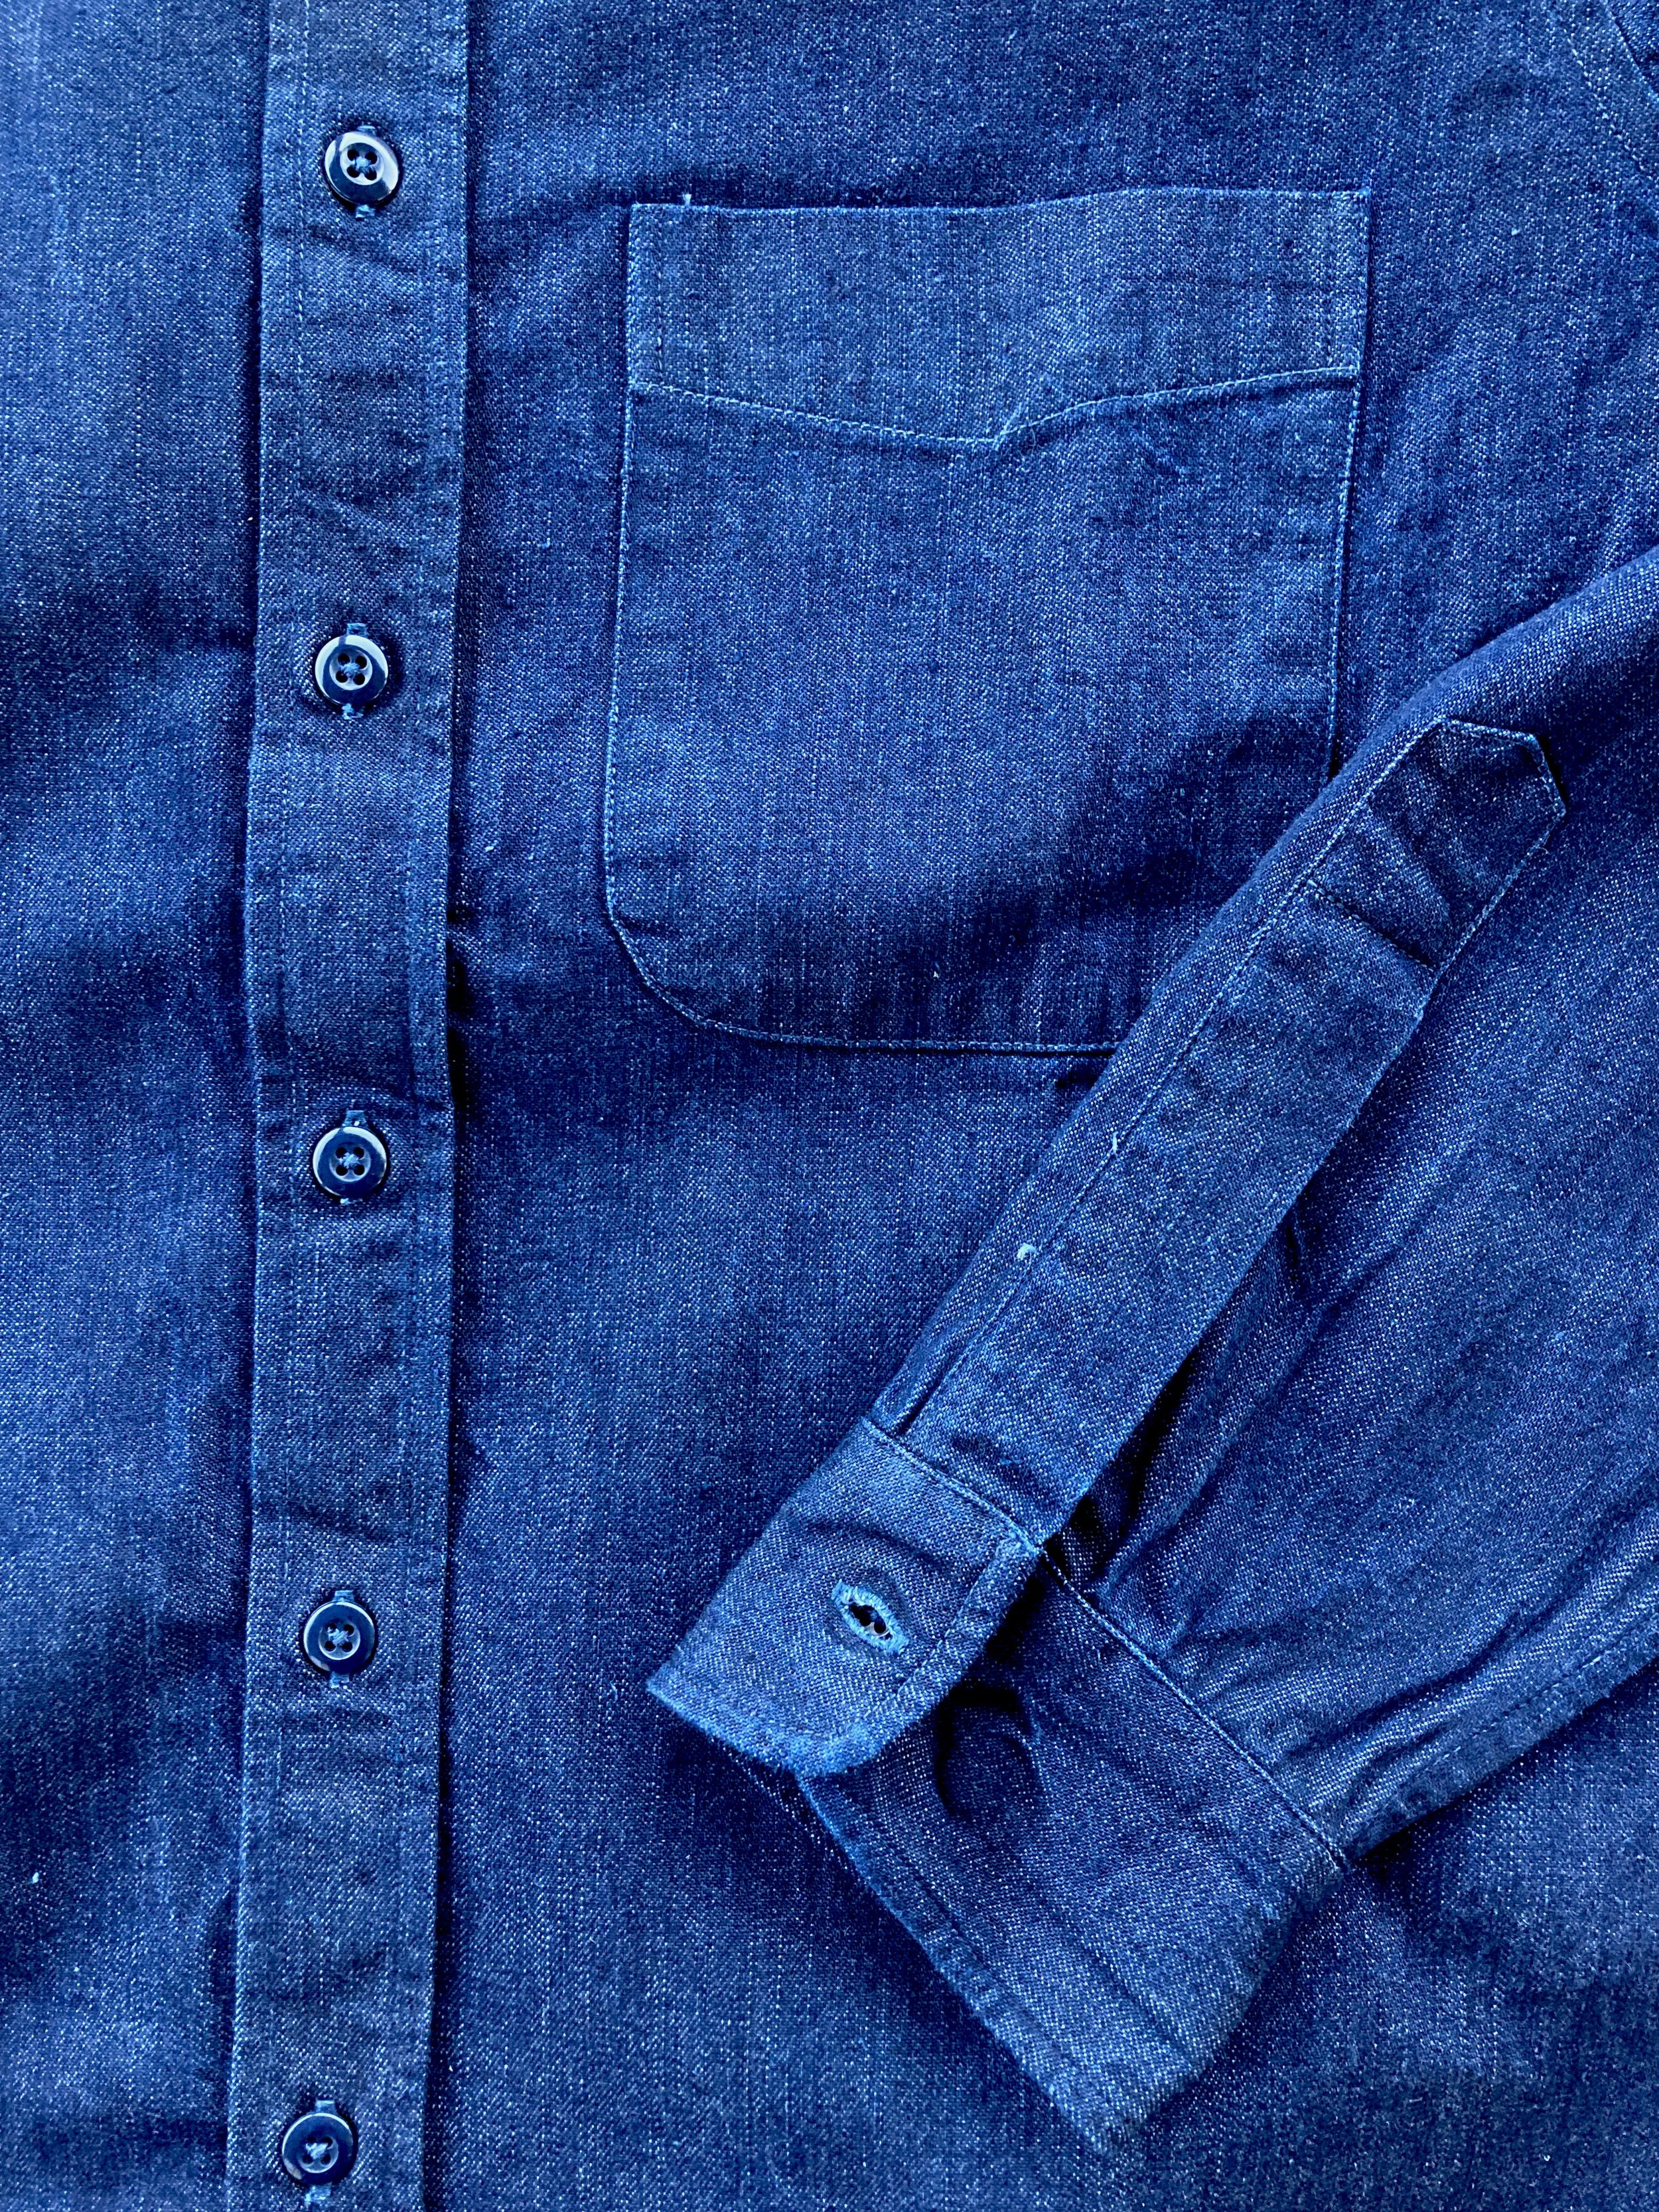 A denim shirt made from the last of the Cone Mills White Oak Denim — .